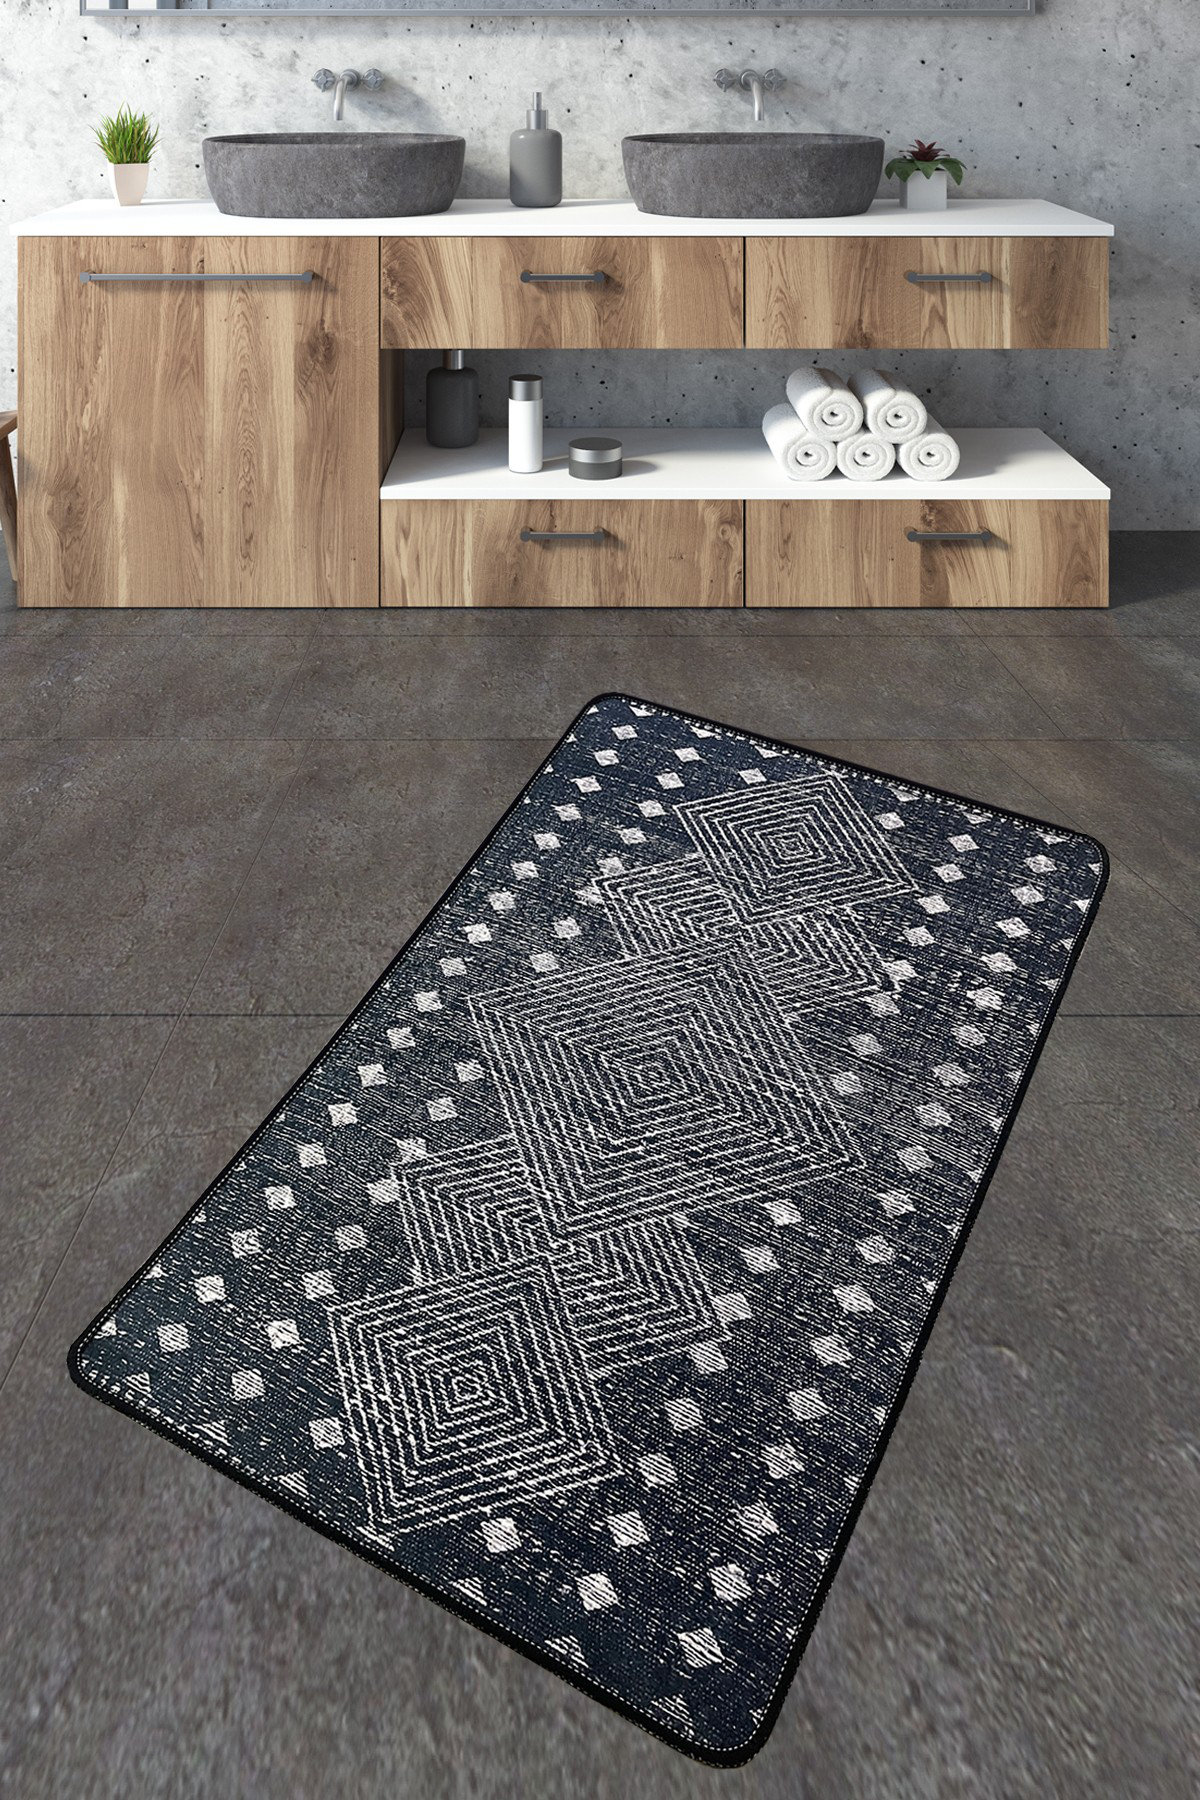 Dundee Deco Falkirk Velindre Plastic / Acrylic Bath Mat with Non